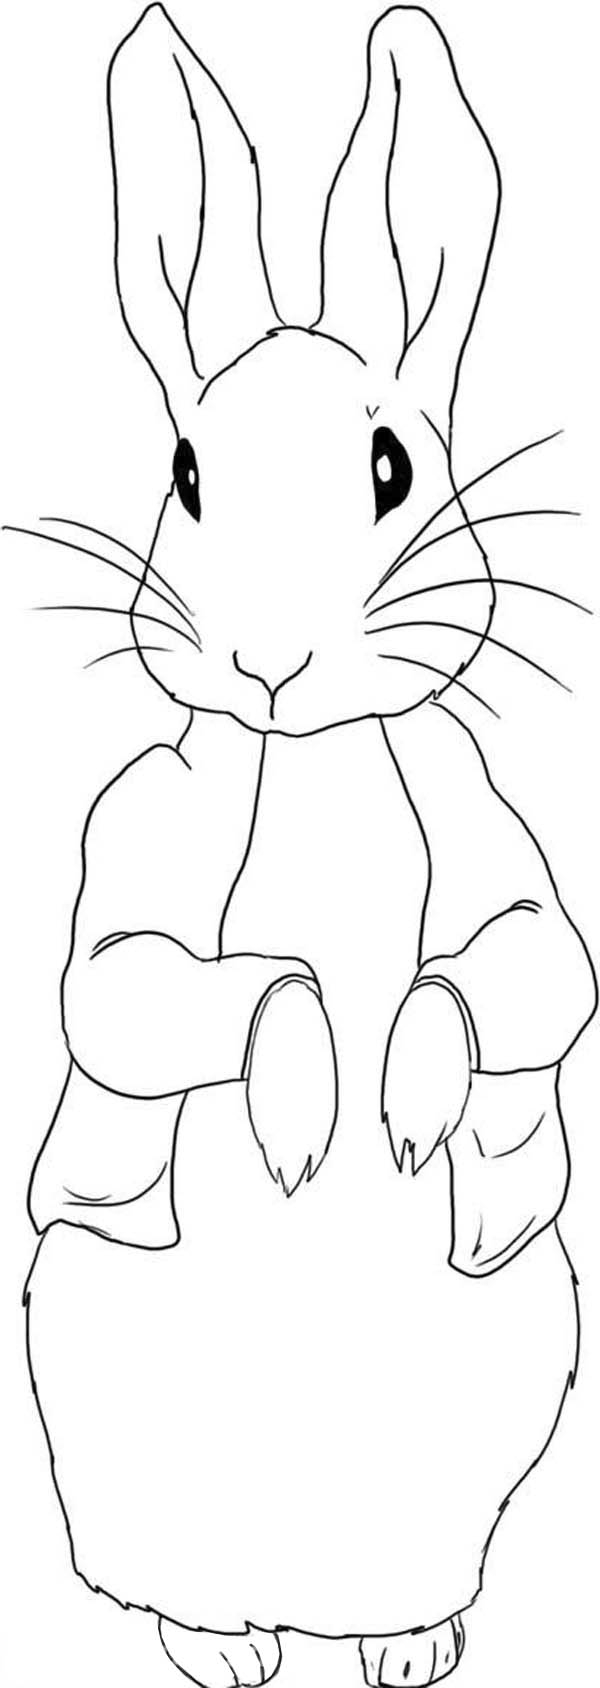 Free Printable Peter Rabbit Coloring Pages Peter Rabbit Pictures To Print Free Coloring Library